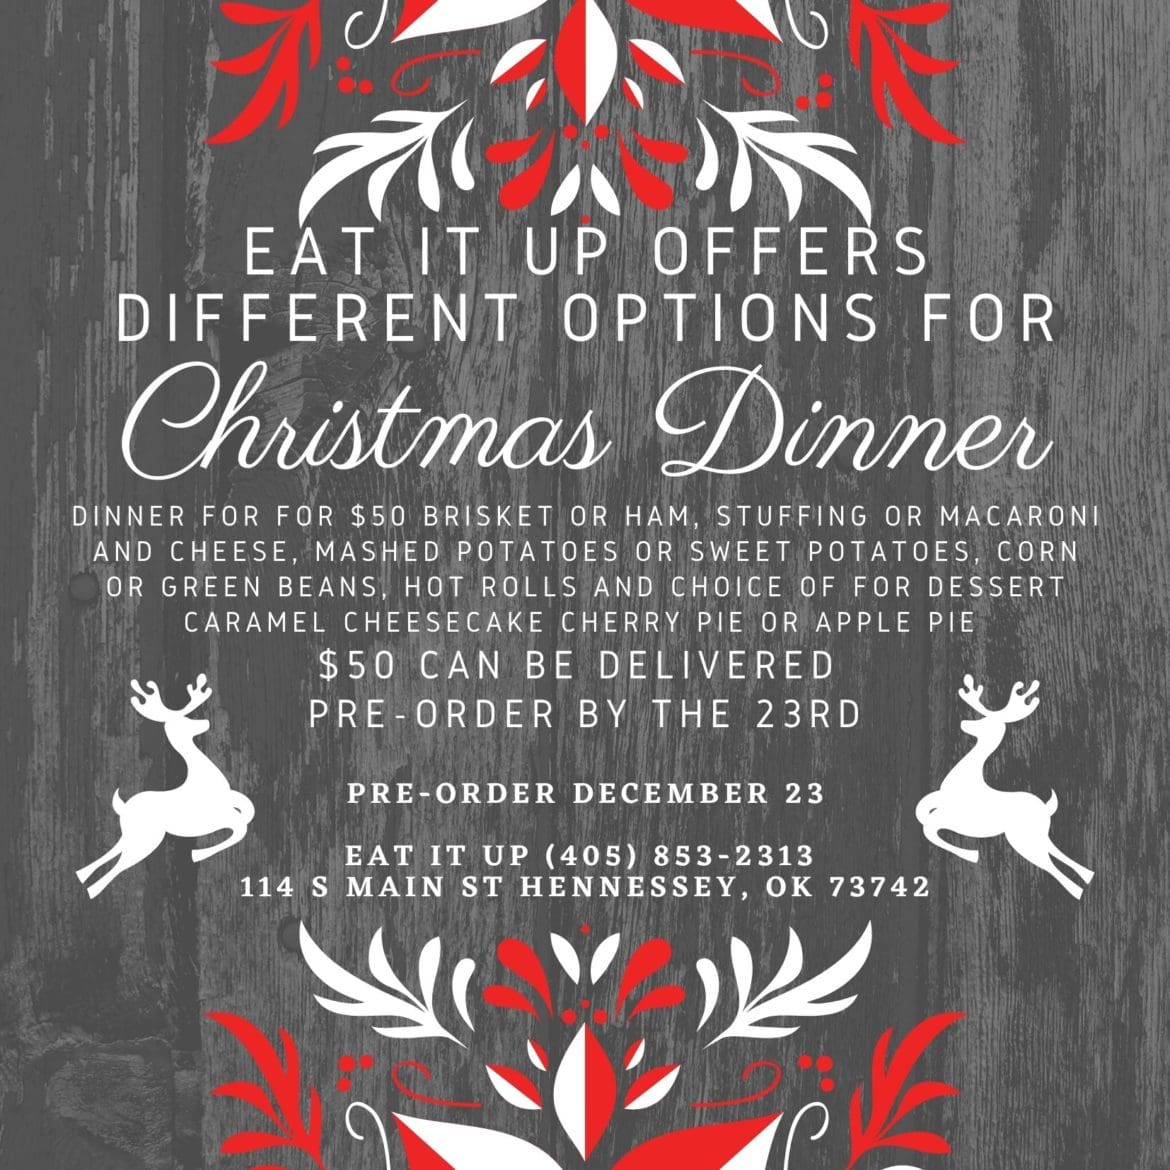 ORDER YOUR CHRISTMAS DINNER WITH TRIMMINGS FROM EAT IT UP!